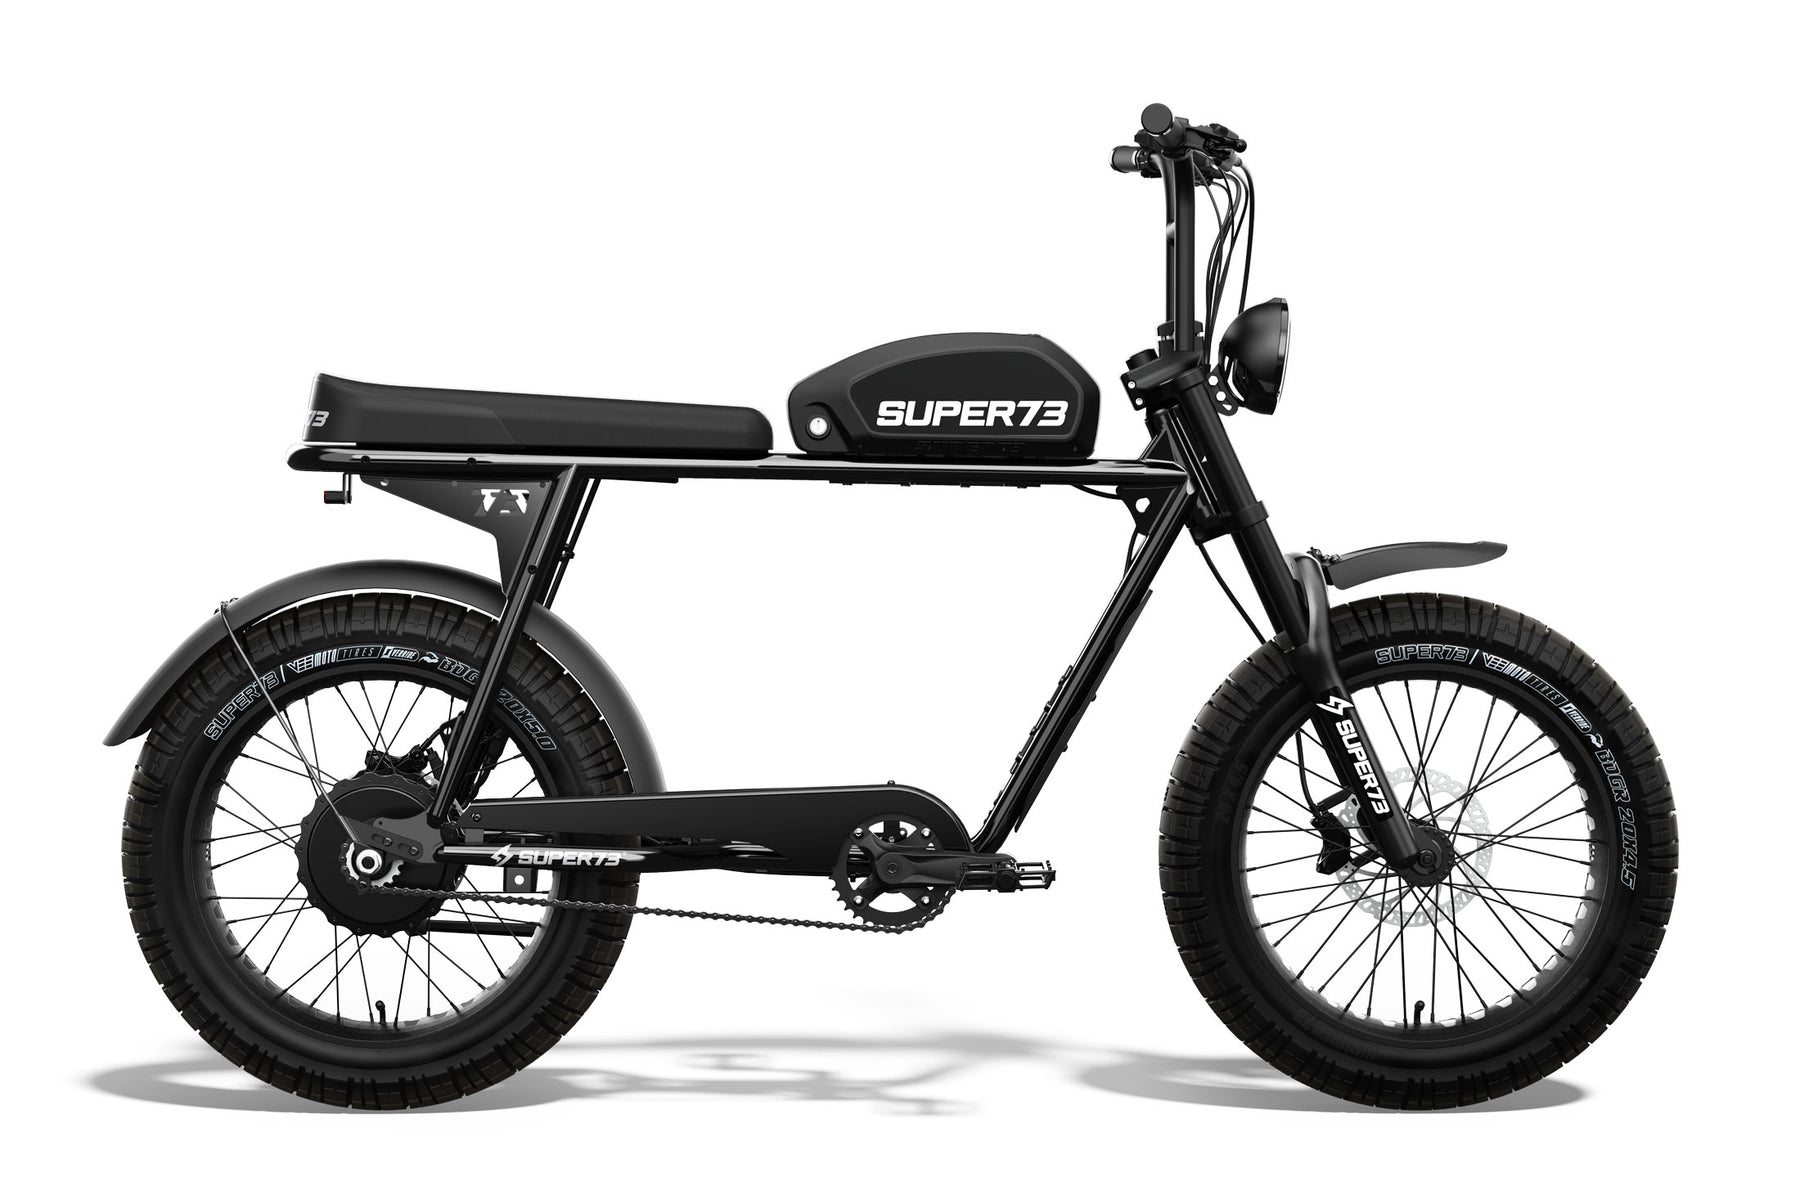 Side view of S2: Obsidian, Super73 ebike